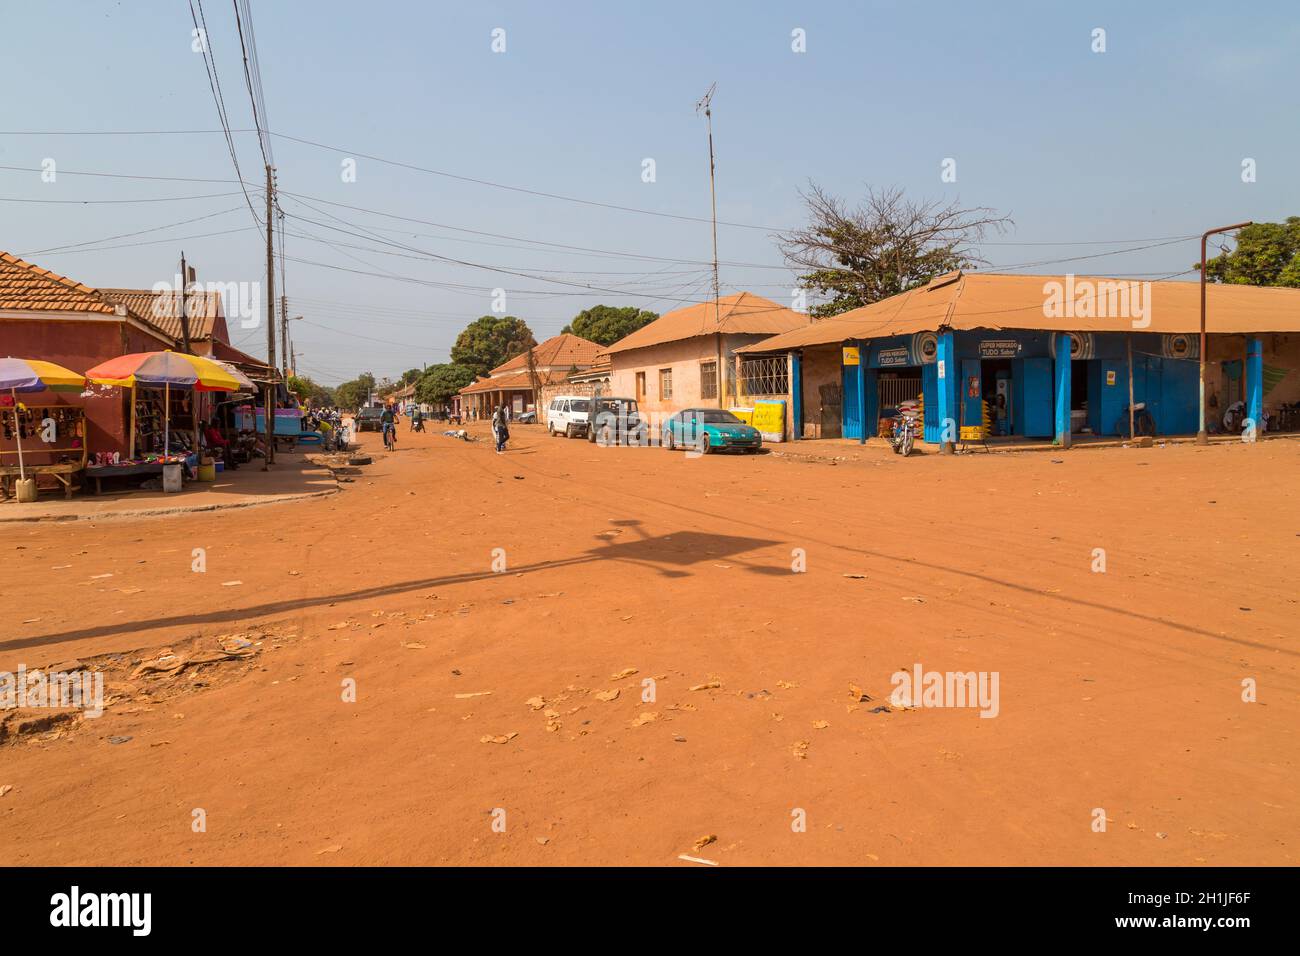 Bissau, Republic of Guinea-Bissau - January 6, 2020: Street scene in the city of Bissau with people at the street, Guinea Bissau Stock Photo